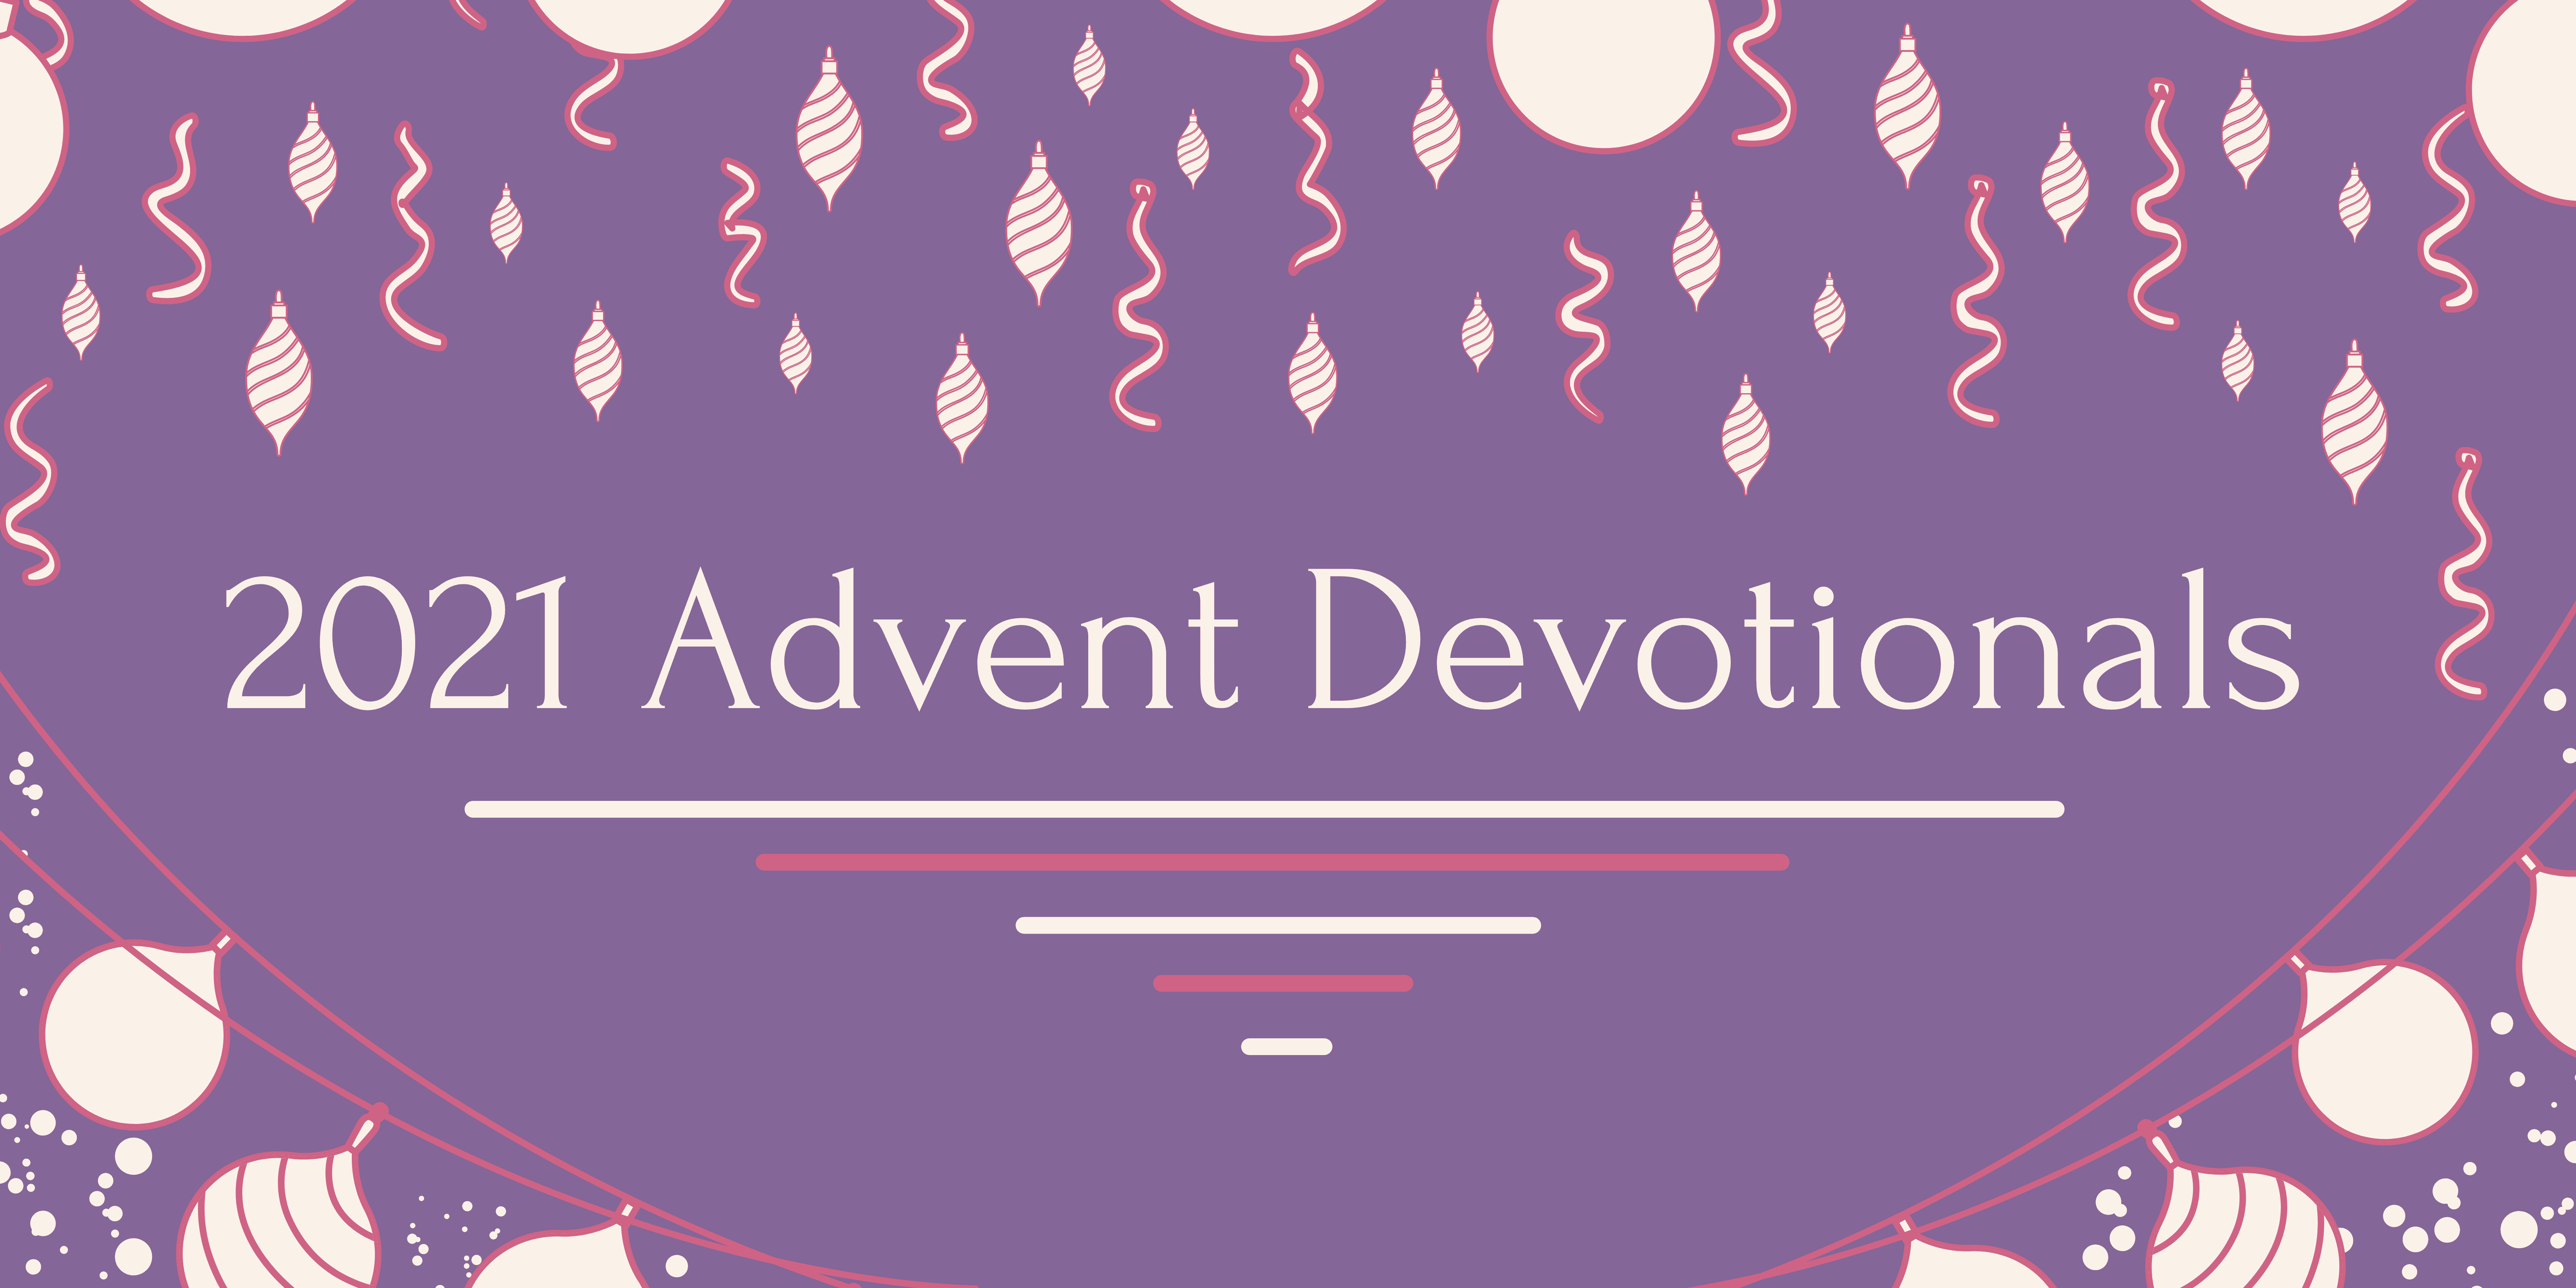 25 Advent Devotionals for Families - Focus on the Family